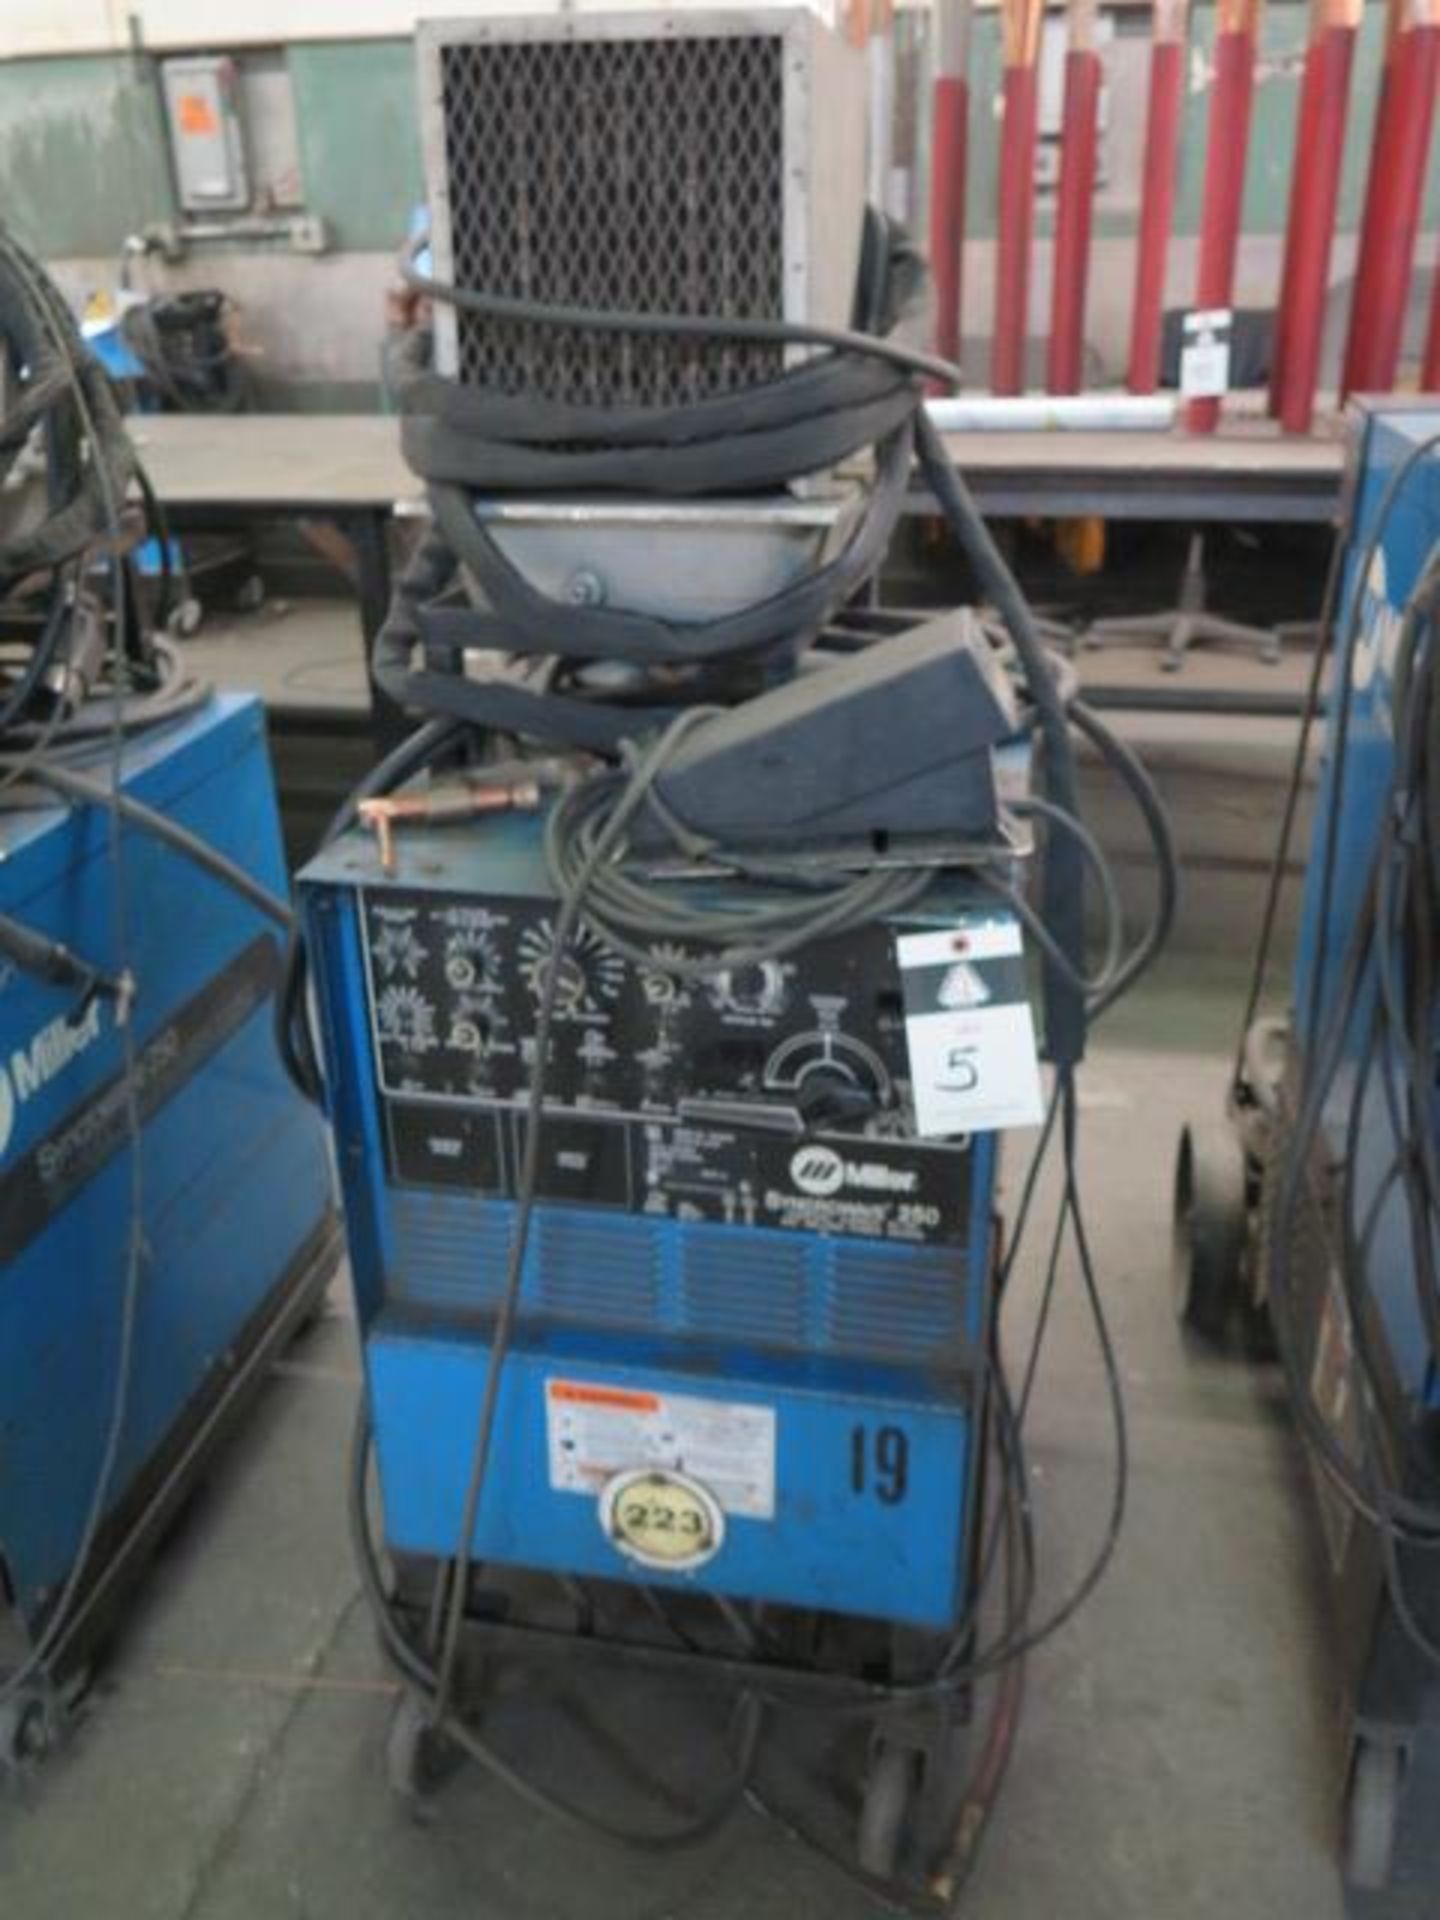 Miller Syncrowave 250 CC-AC/DC Arc Welding Power Source s/n KF945407 w/ Cart SOLD AS-IS